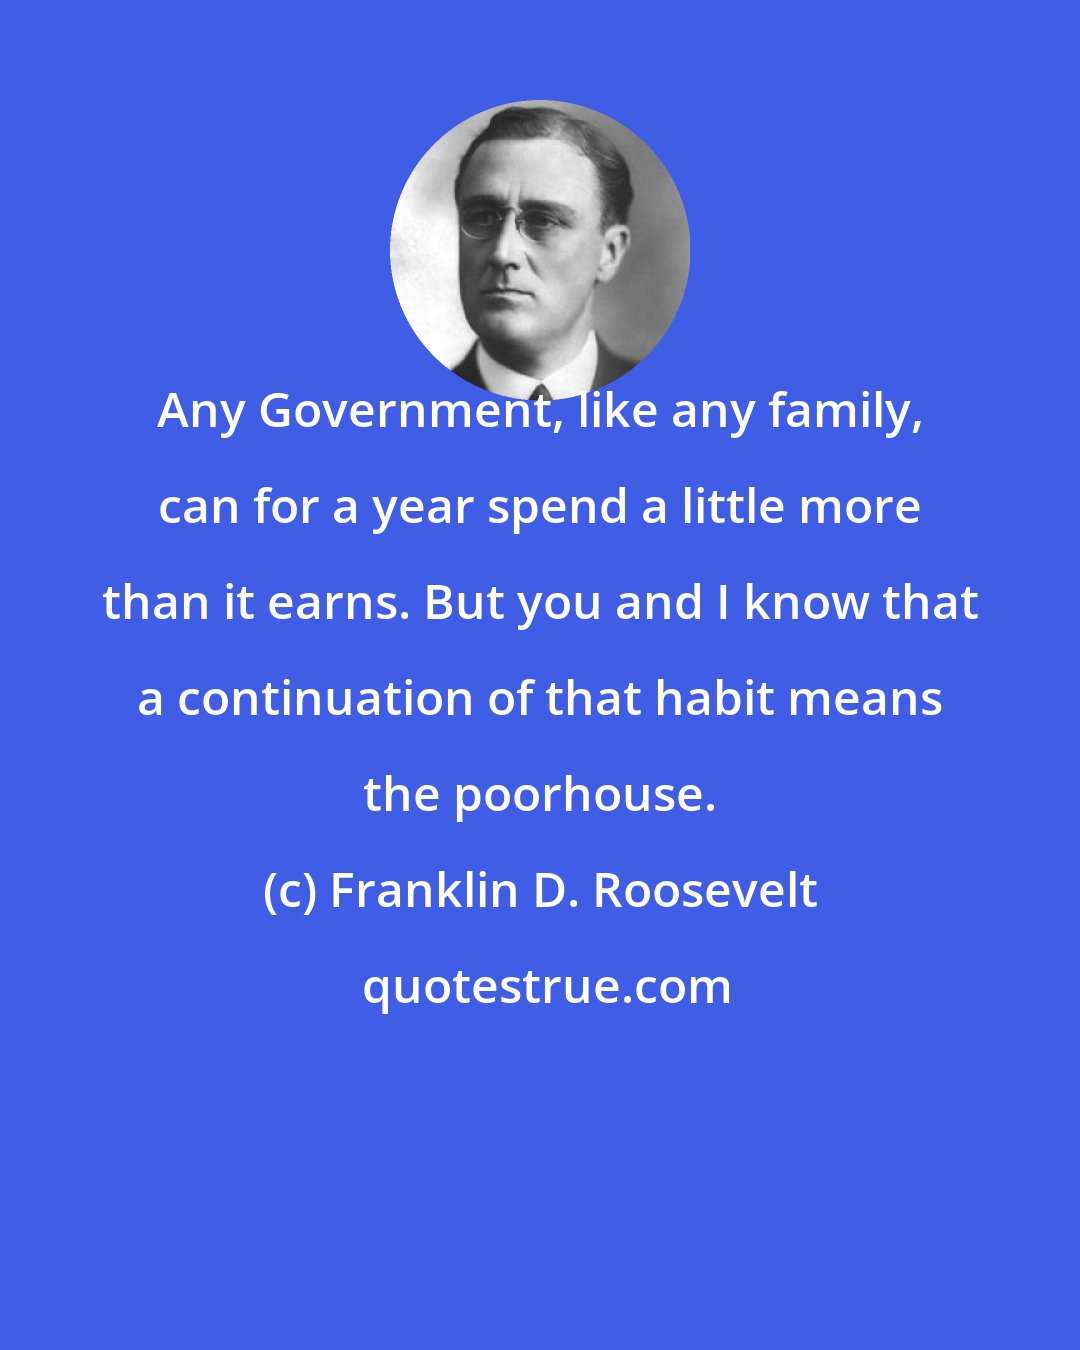 Franklin D. Roosevelt: Any Government, like any family, can for a year spend a little more than it earns. But you and I know that a continuation of that habit means the poorhouse.